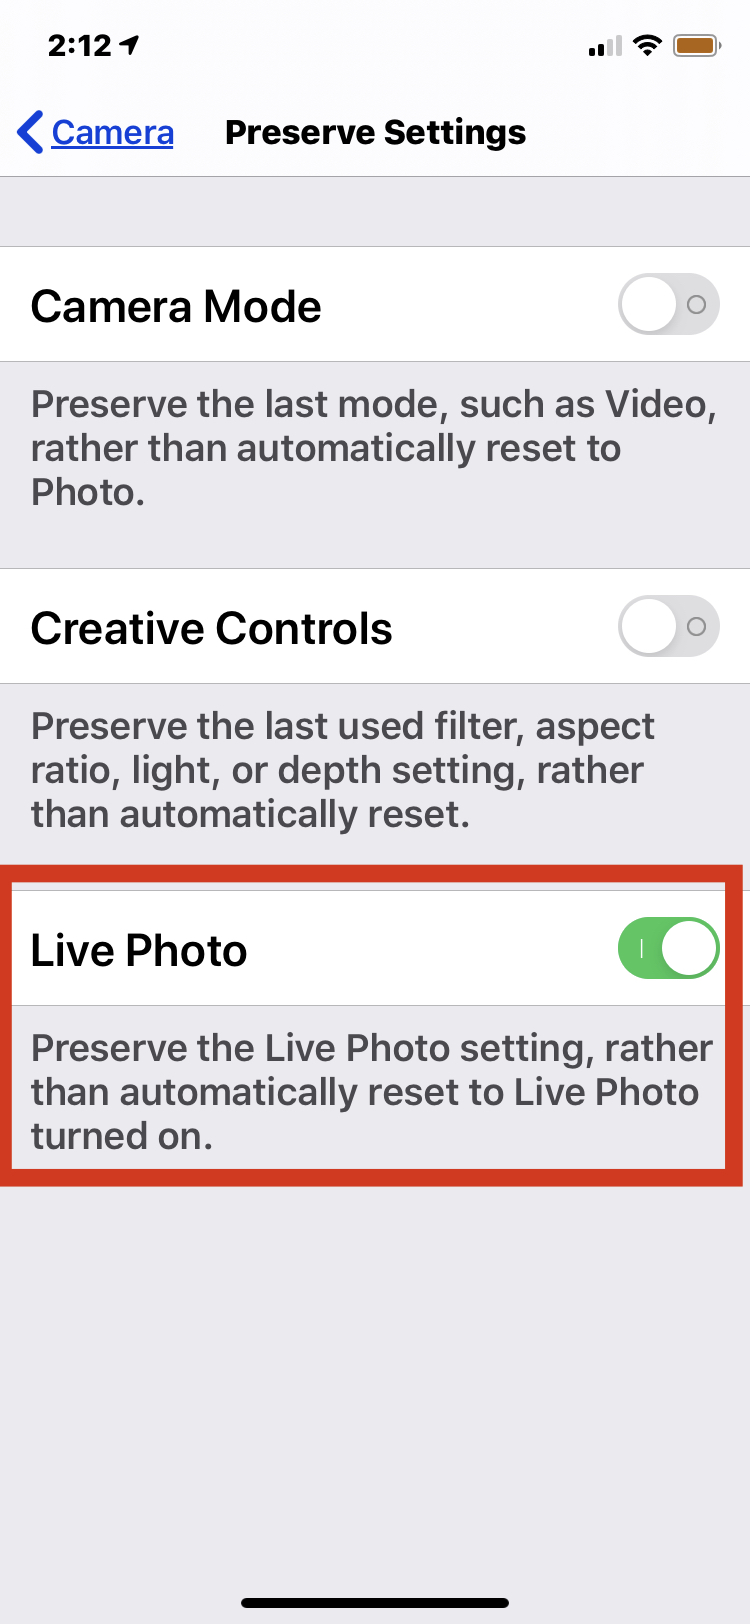 How to Completely Turn Off Live Photo on iPhone Camera